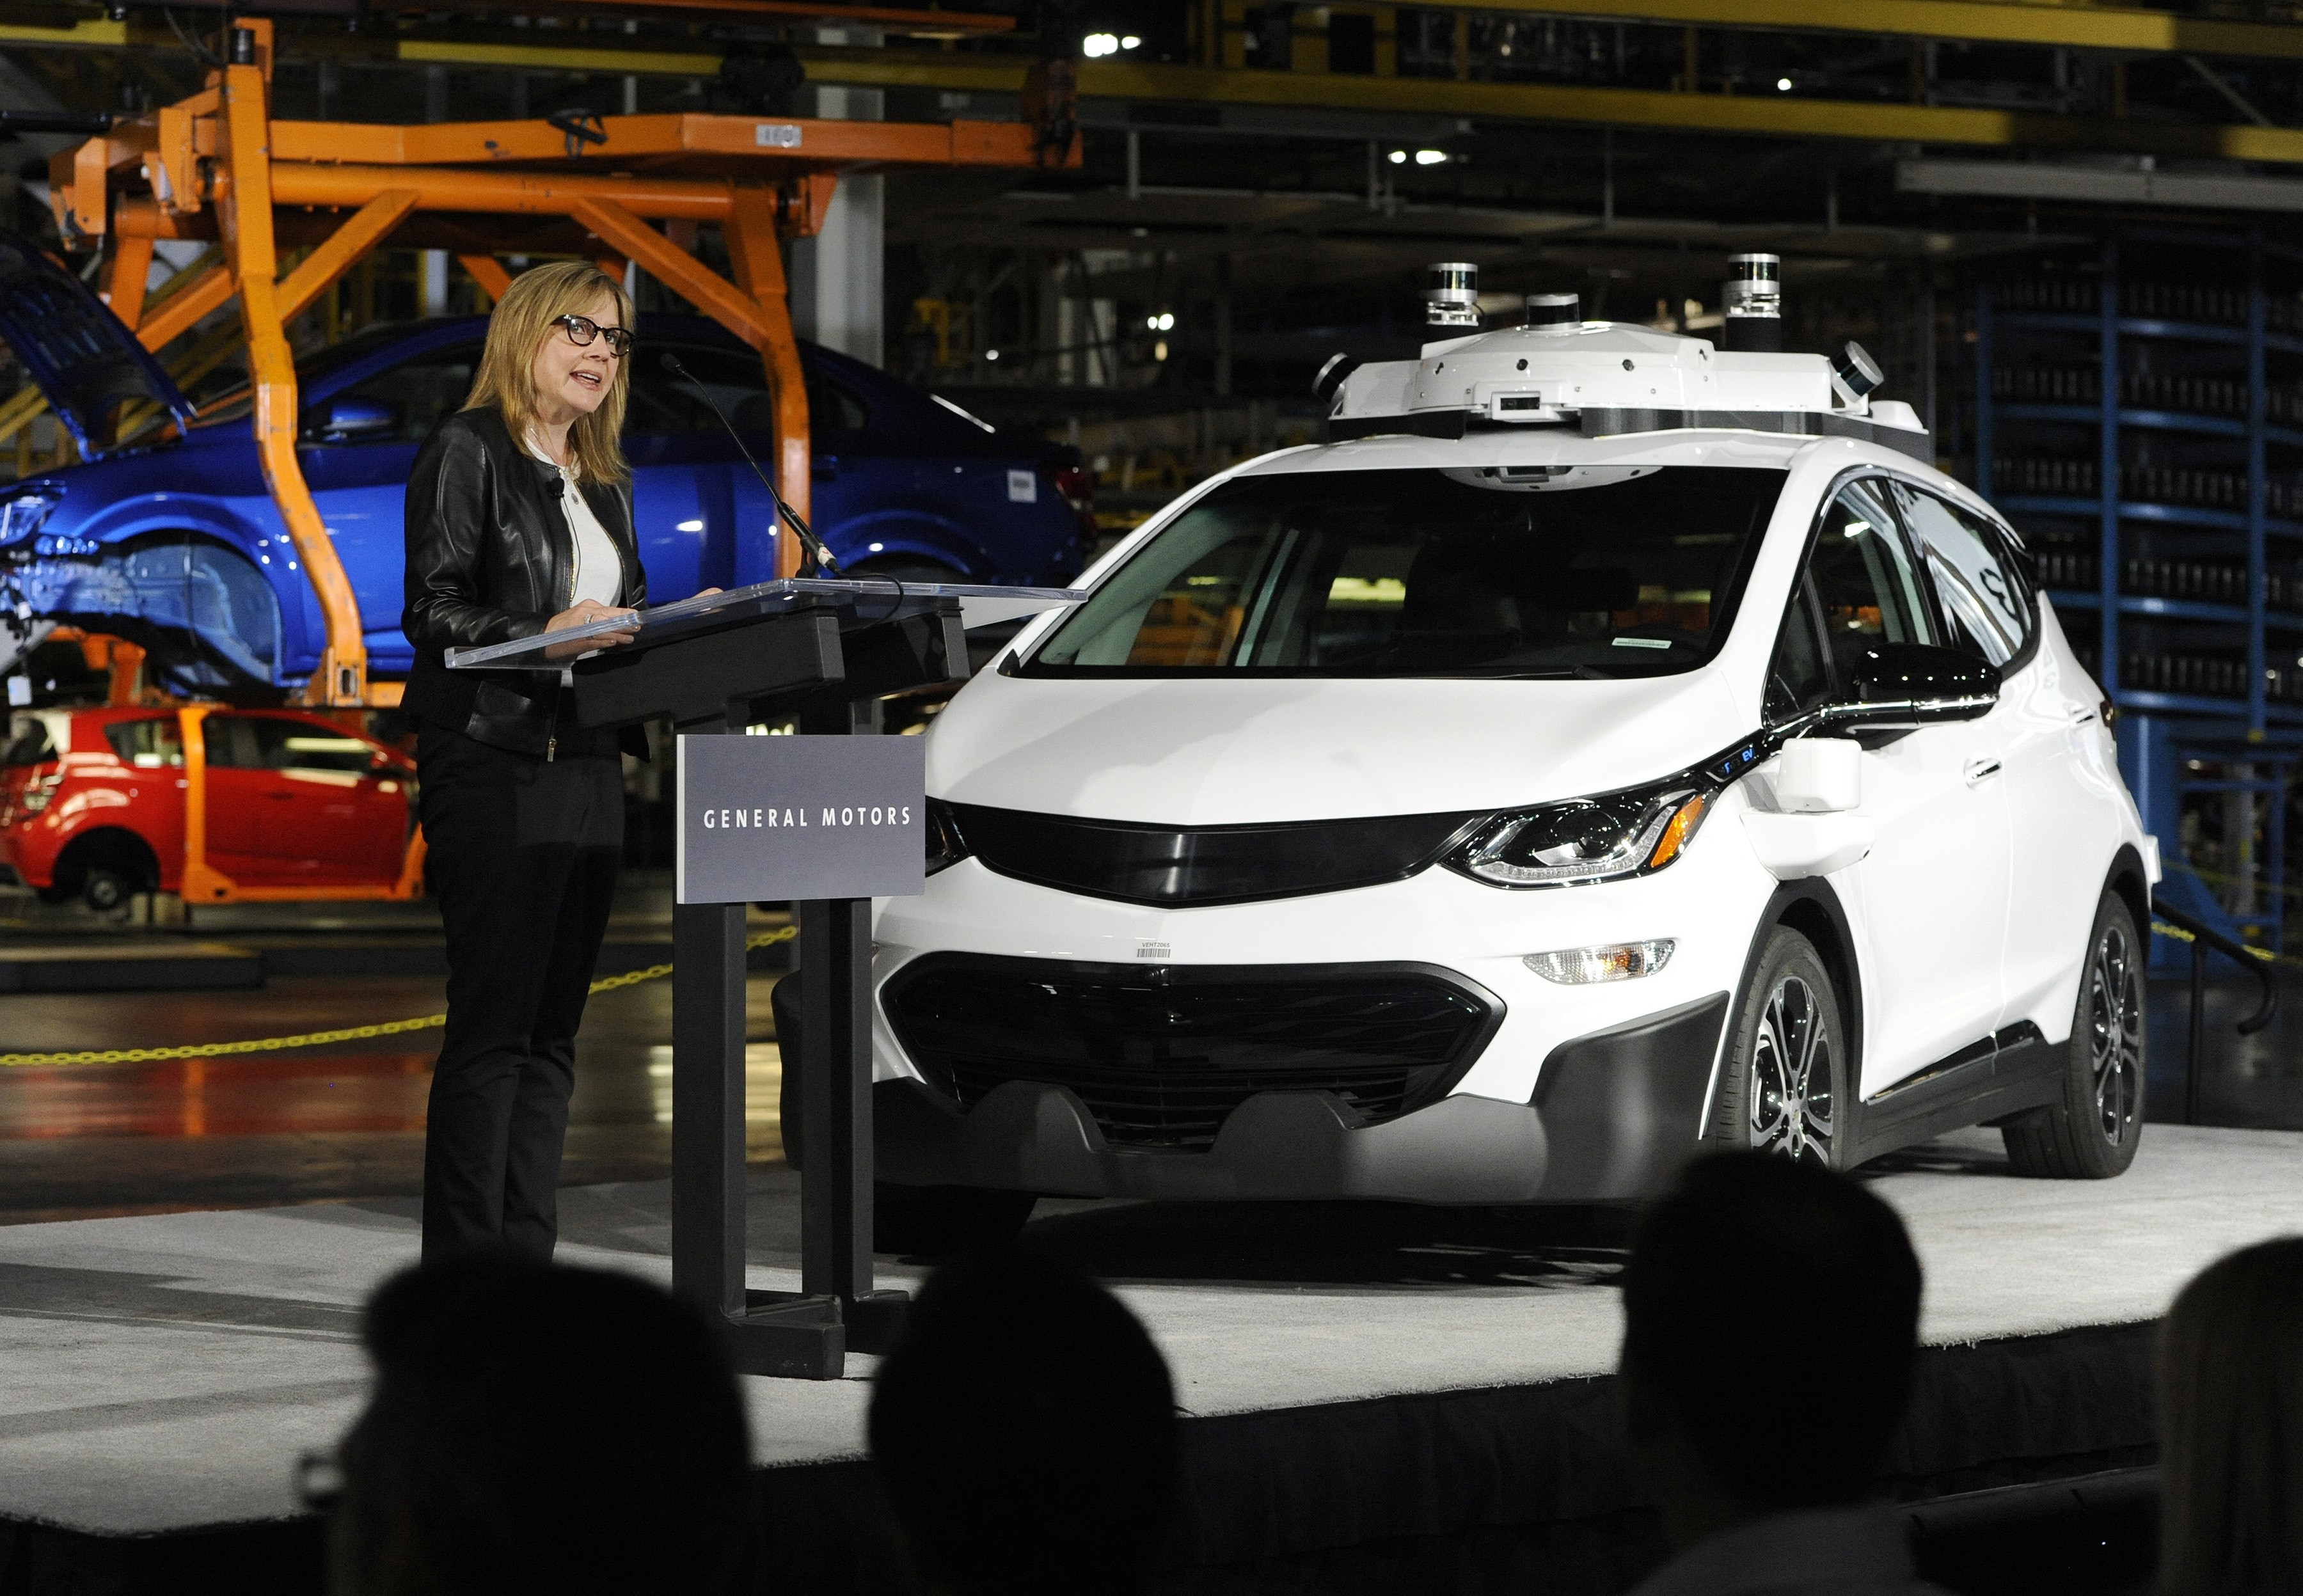 General Motors chair and CEO Mary Barra stands next to a self-driving Chevrolet as she gives updates about the company’s autonomous vehicle development programme, in Michigan on June 13. Photo: AP